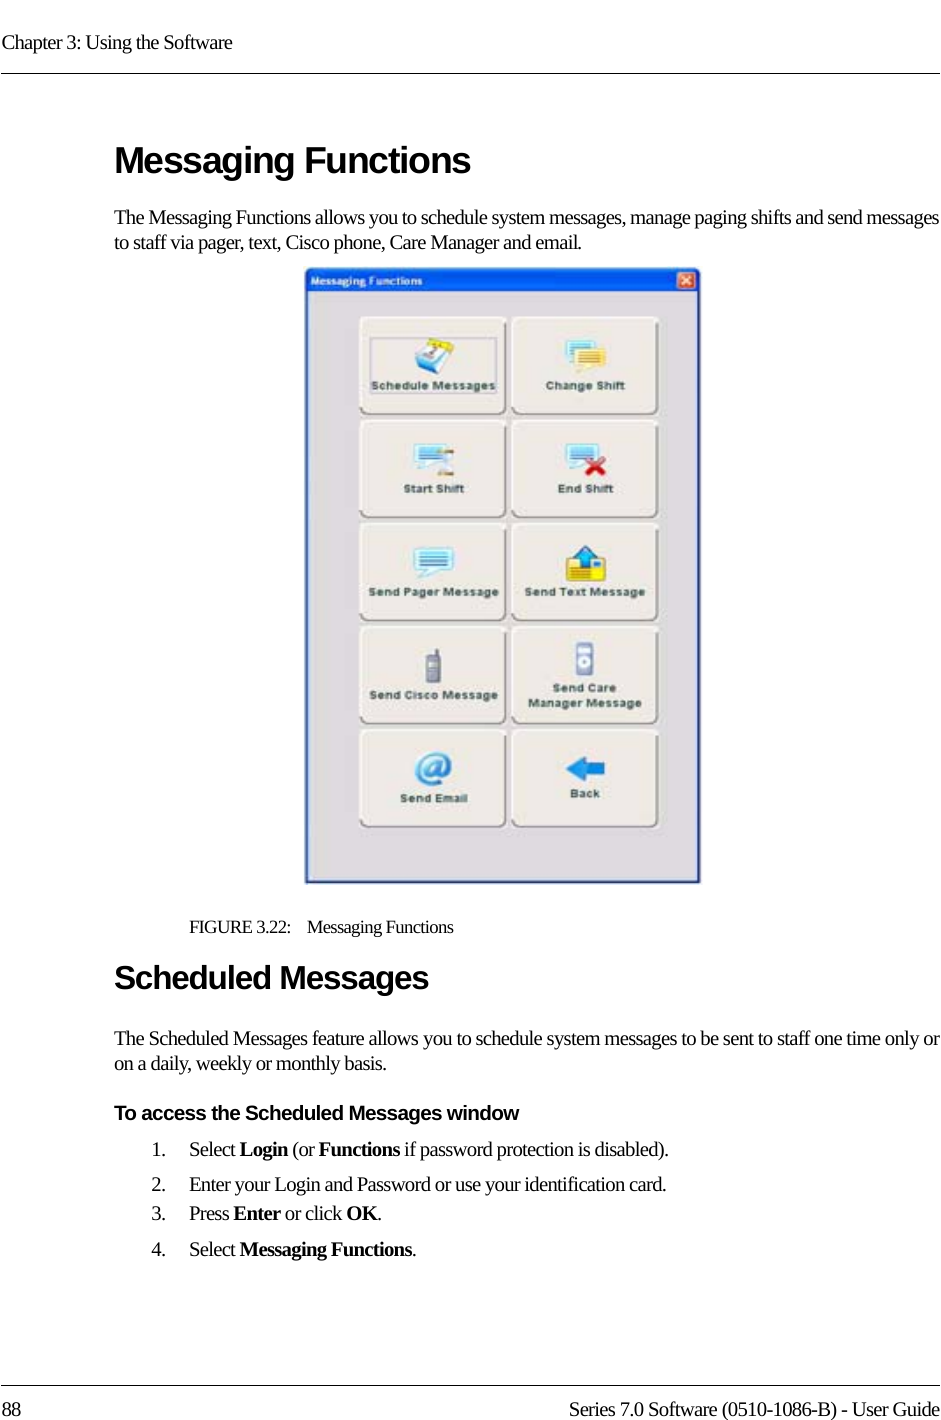 Chapter 3: Using the Software88 Series 7.0 Software (0510-1086-B) - User GuideMessaging FunctionsThe Messaging Functions allows you to schedule system messages, manage paging shifts and send messages to staff via pager, text, Cisco phone, Care Manager and email.FIGURE 3.22:    Messaging FunctionsScheduled MessagesThe Scheduled Messages feature allows you to schedule system messages to be sent to staff one time only or on a daily, weekly or monthly basis.To access the Scheduled Messages window1.    Select Login (or Functions if password protection is disabled).2.    Enter your Login and Password or use your identification card. 3.    Press Enter or click OK.4.    Select Messaging Functions.